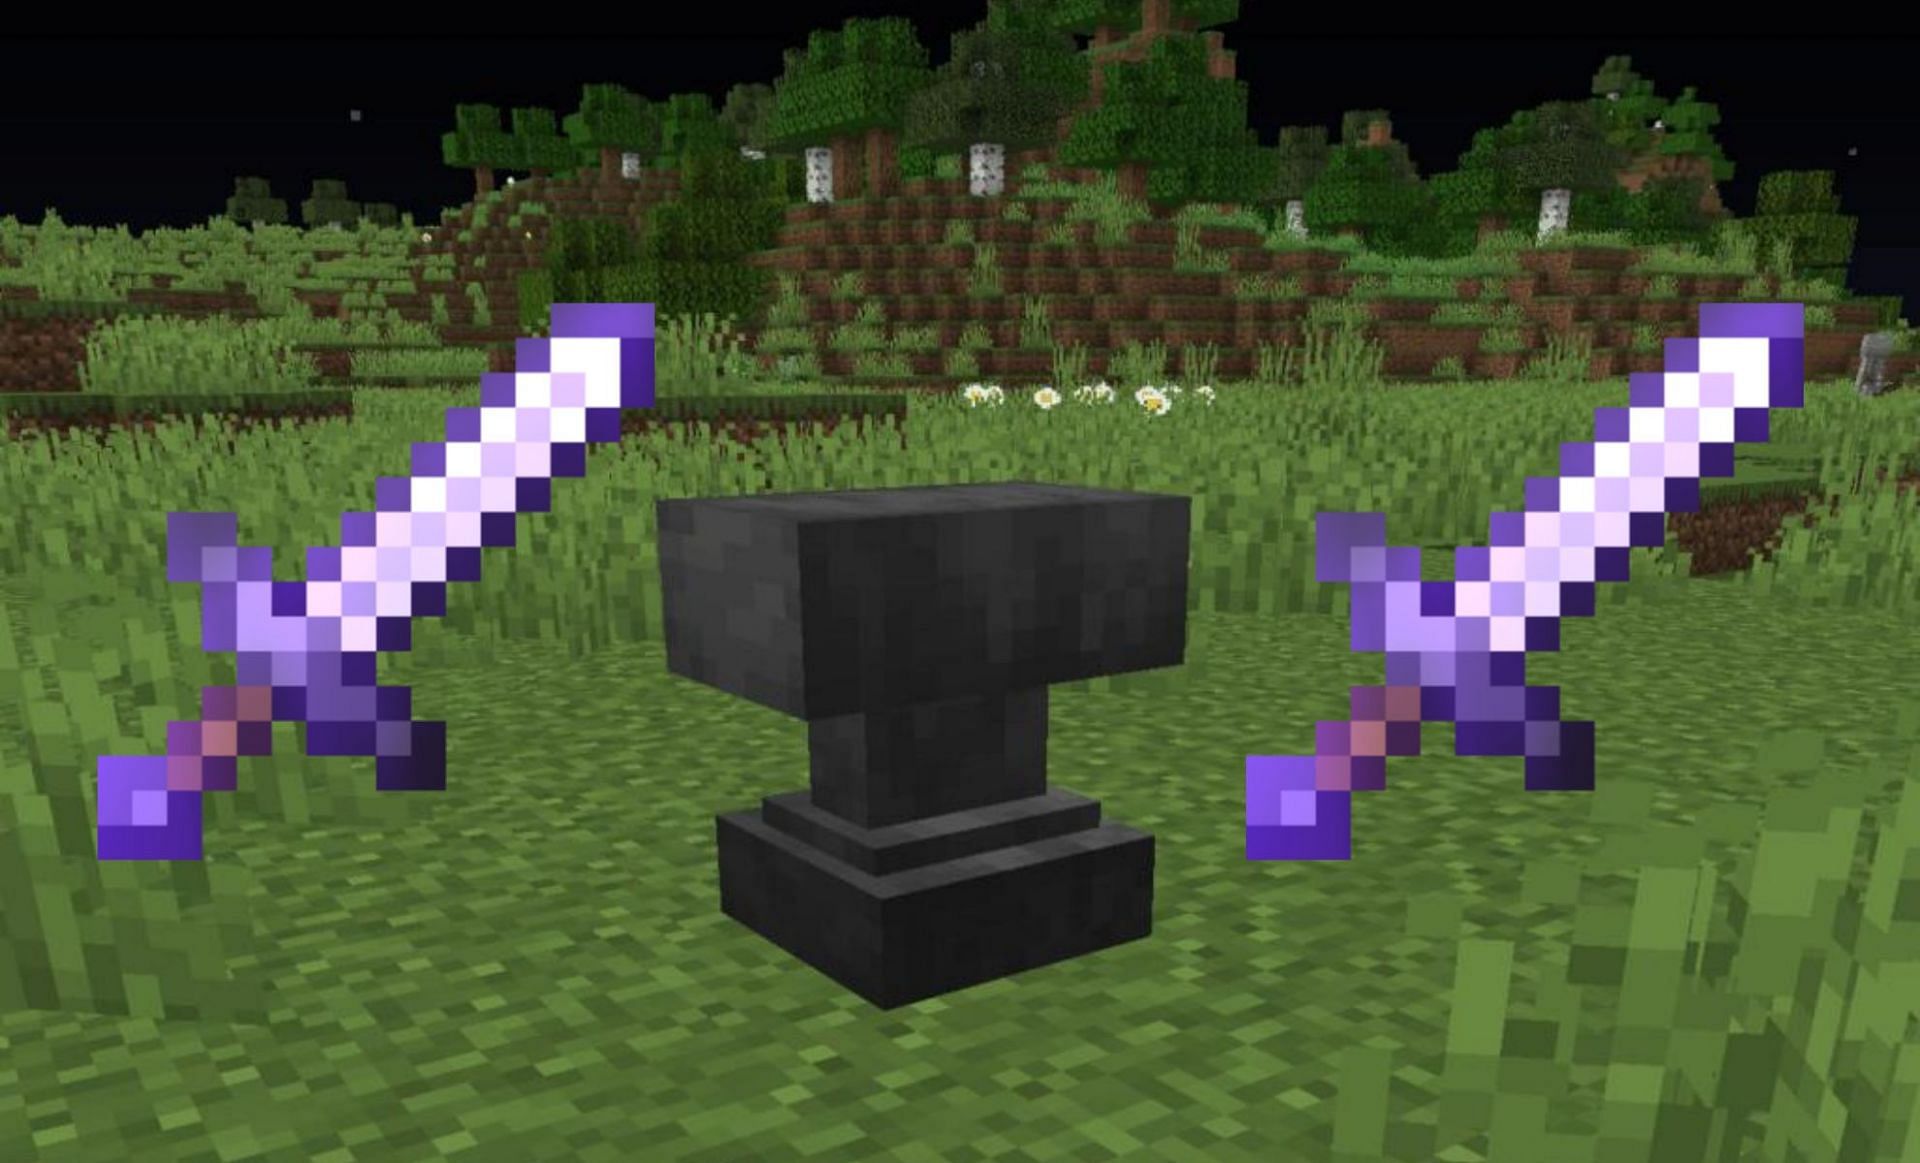 Combining items (Images via Minecraft Wiki)